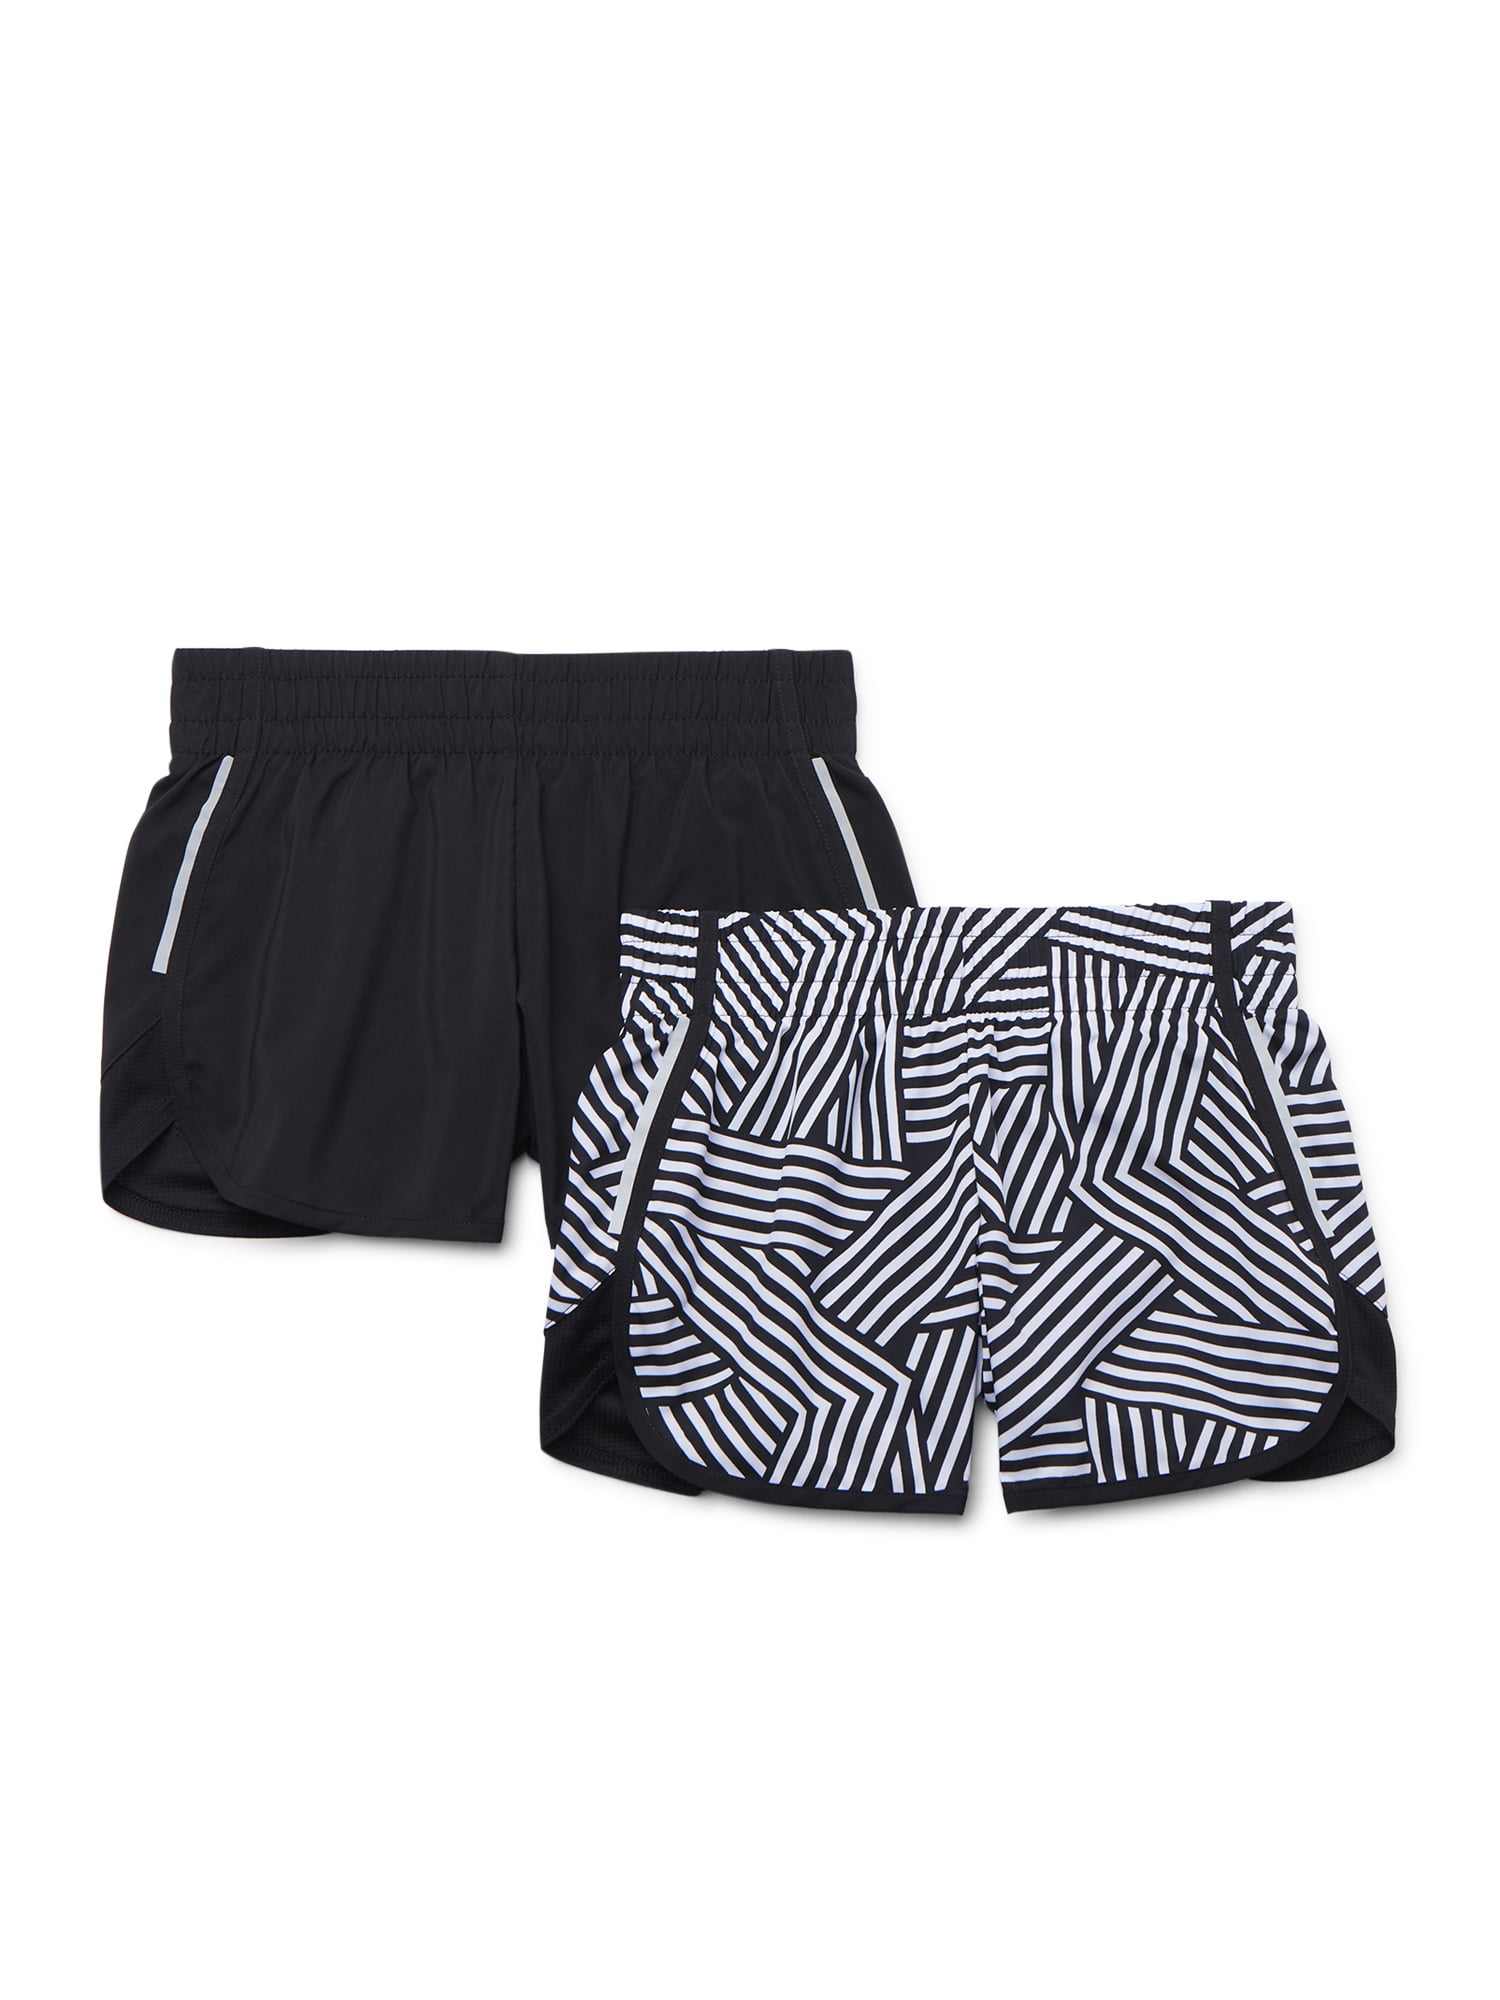 Athletic Works Girls Print & Solid Active Running Shorts, 2-Pack, Sizes  4-18 & Plus - Walmart.com